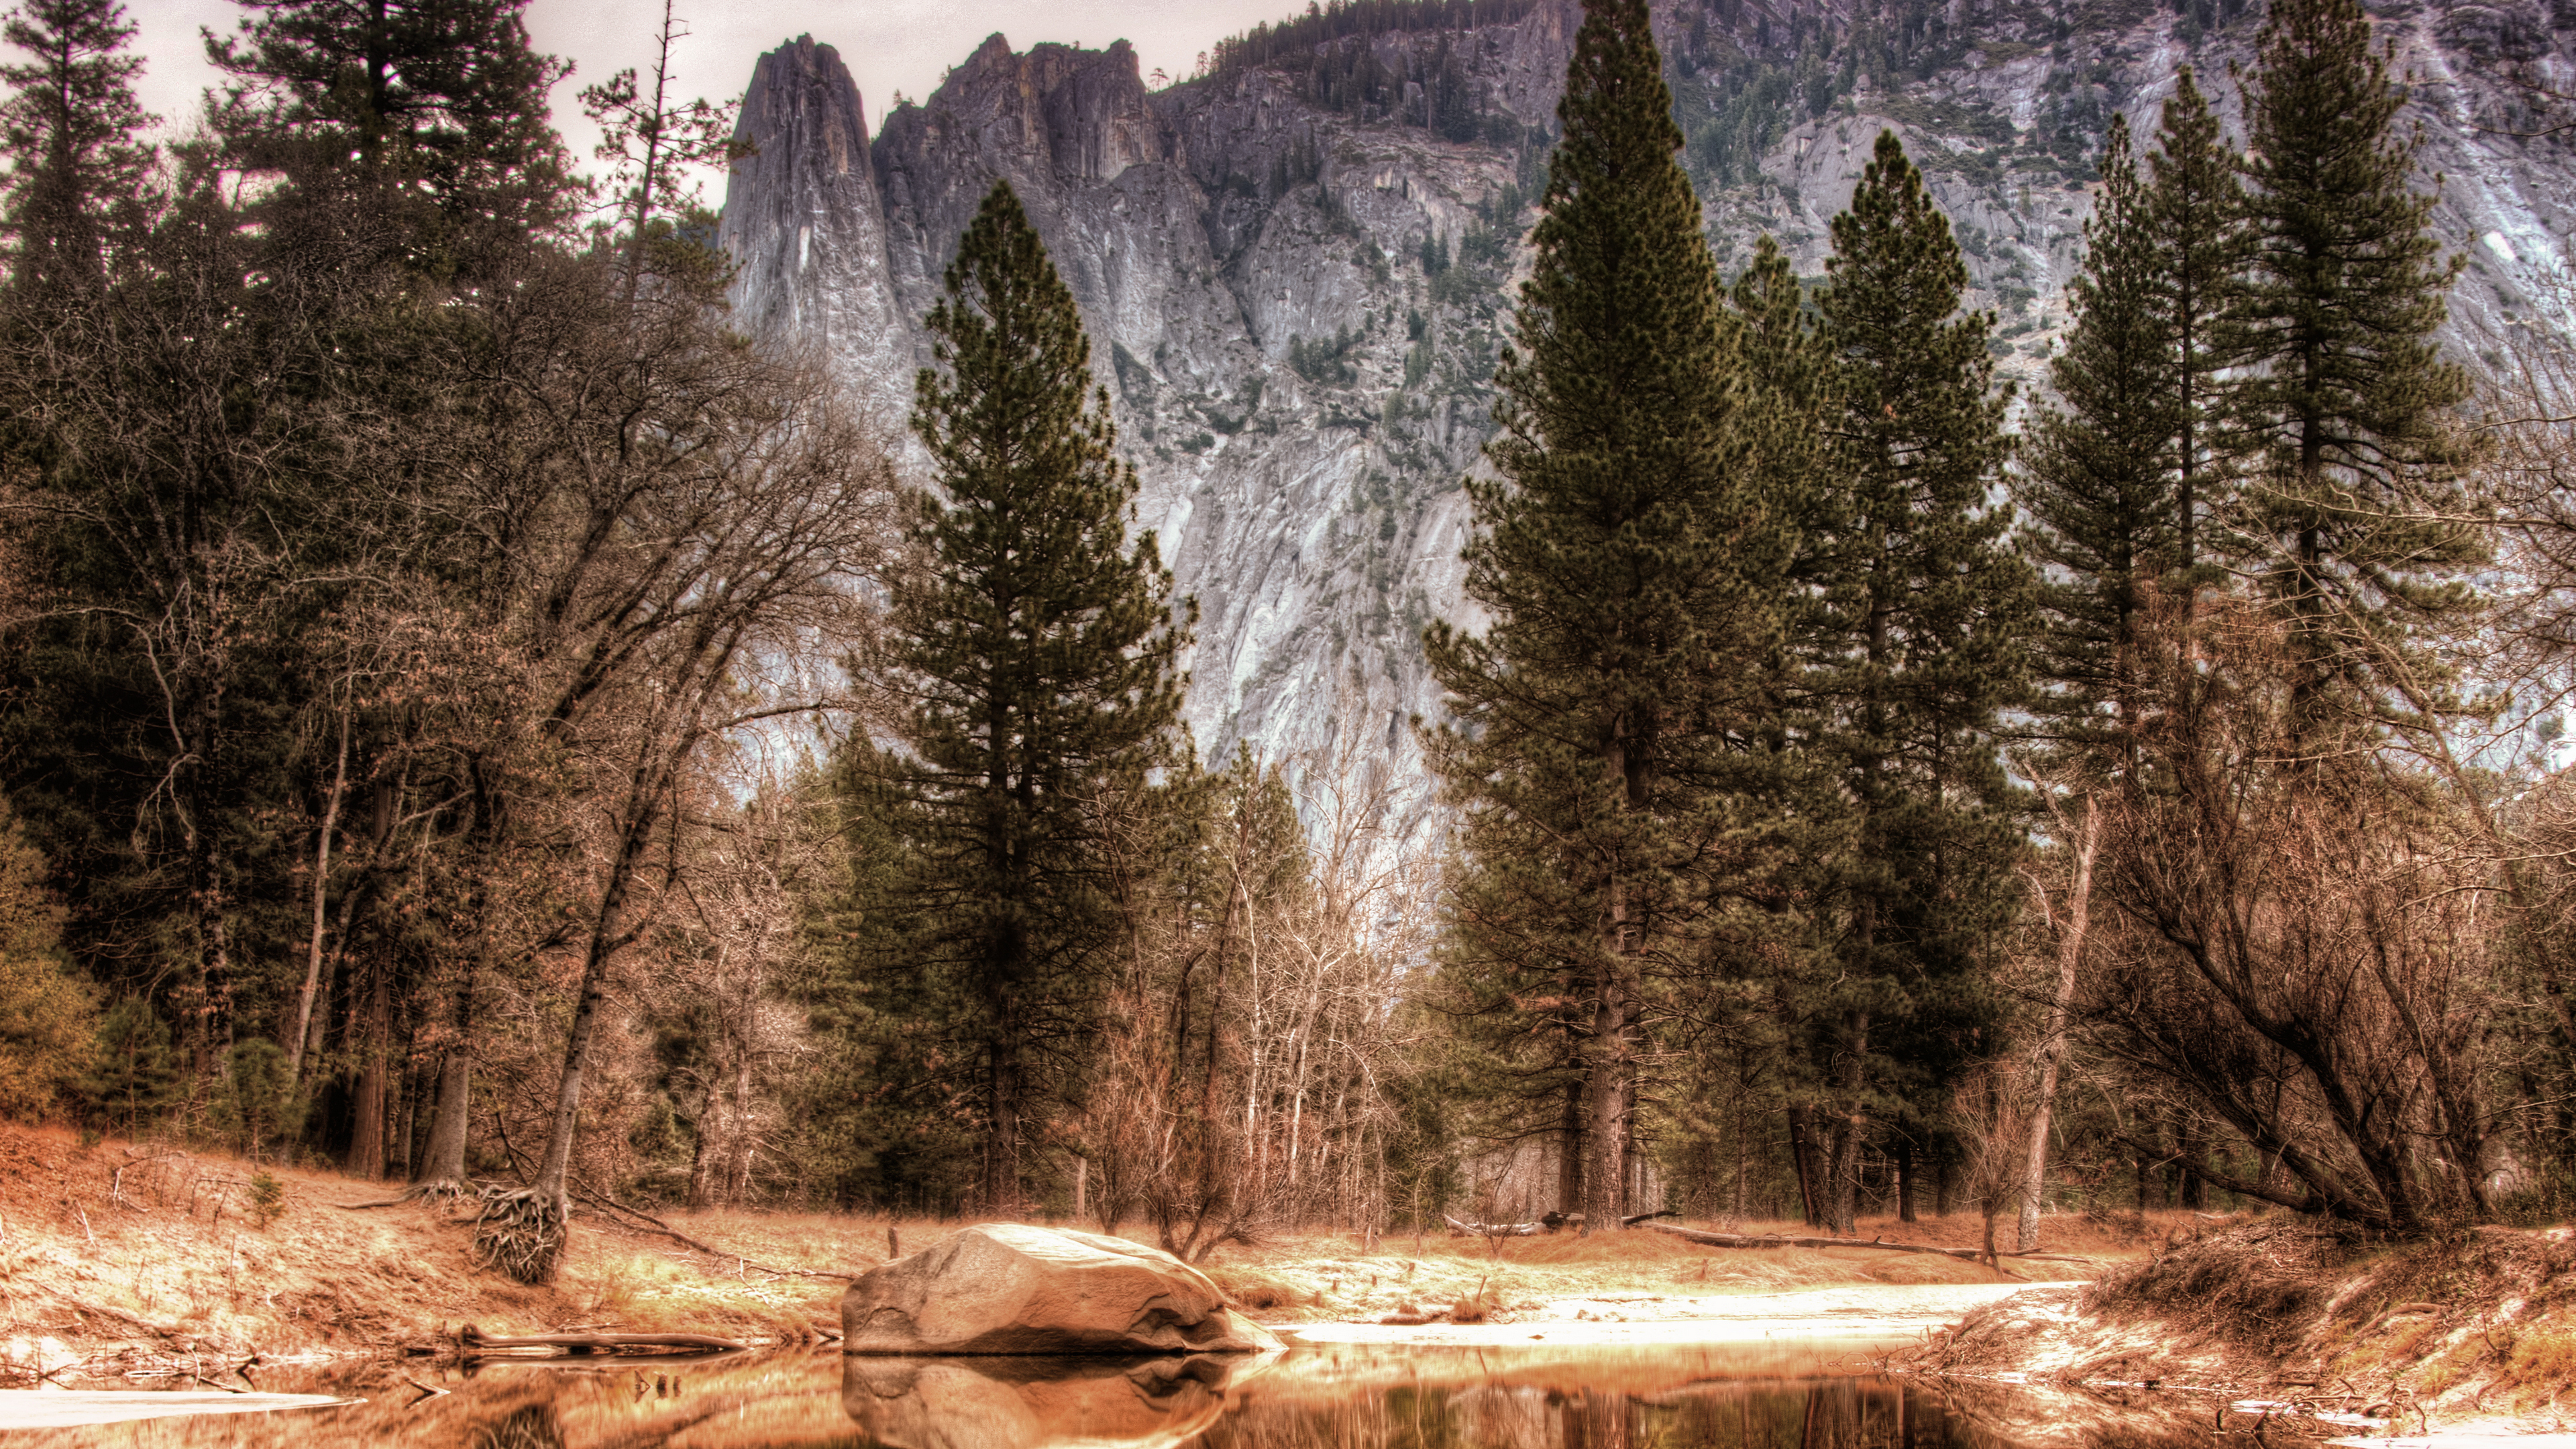 General 3840x2160 Trey Ratcliff 4K photography California trees nature mountains water